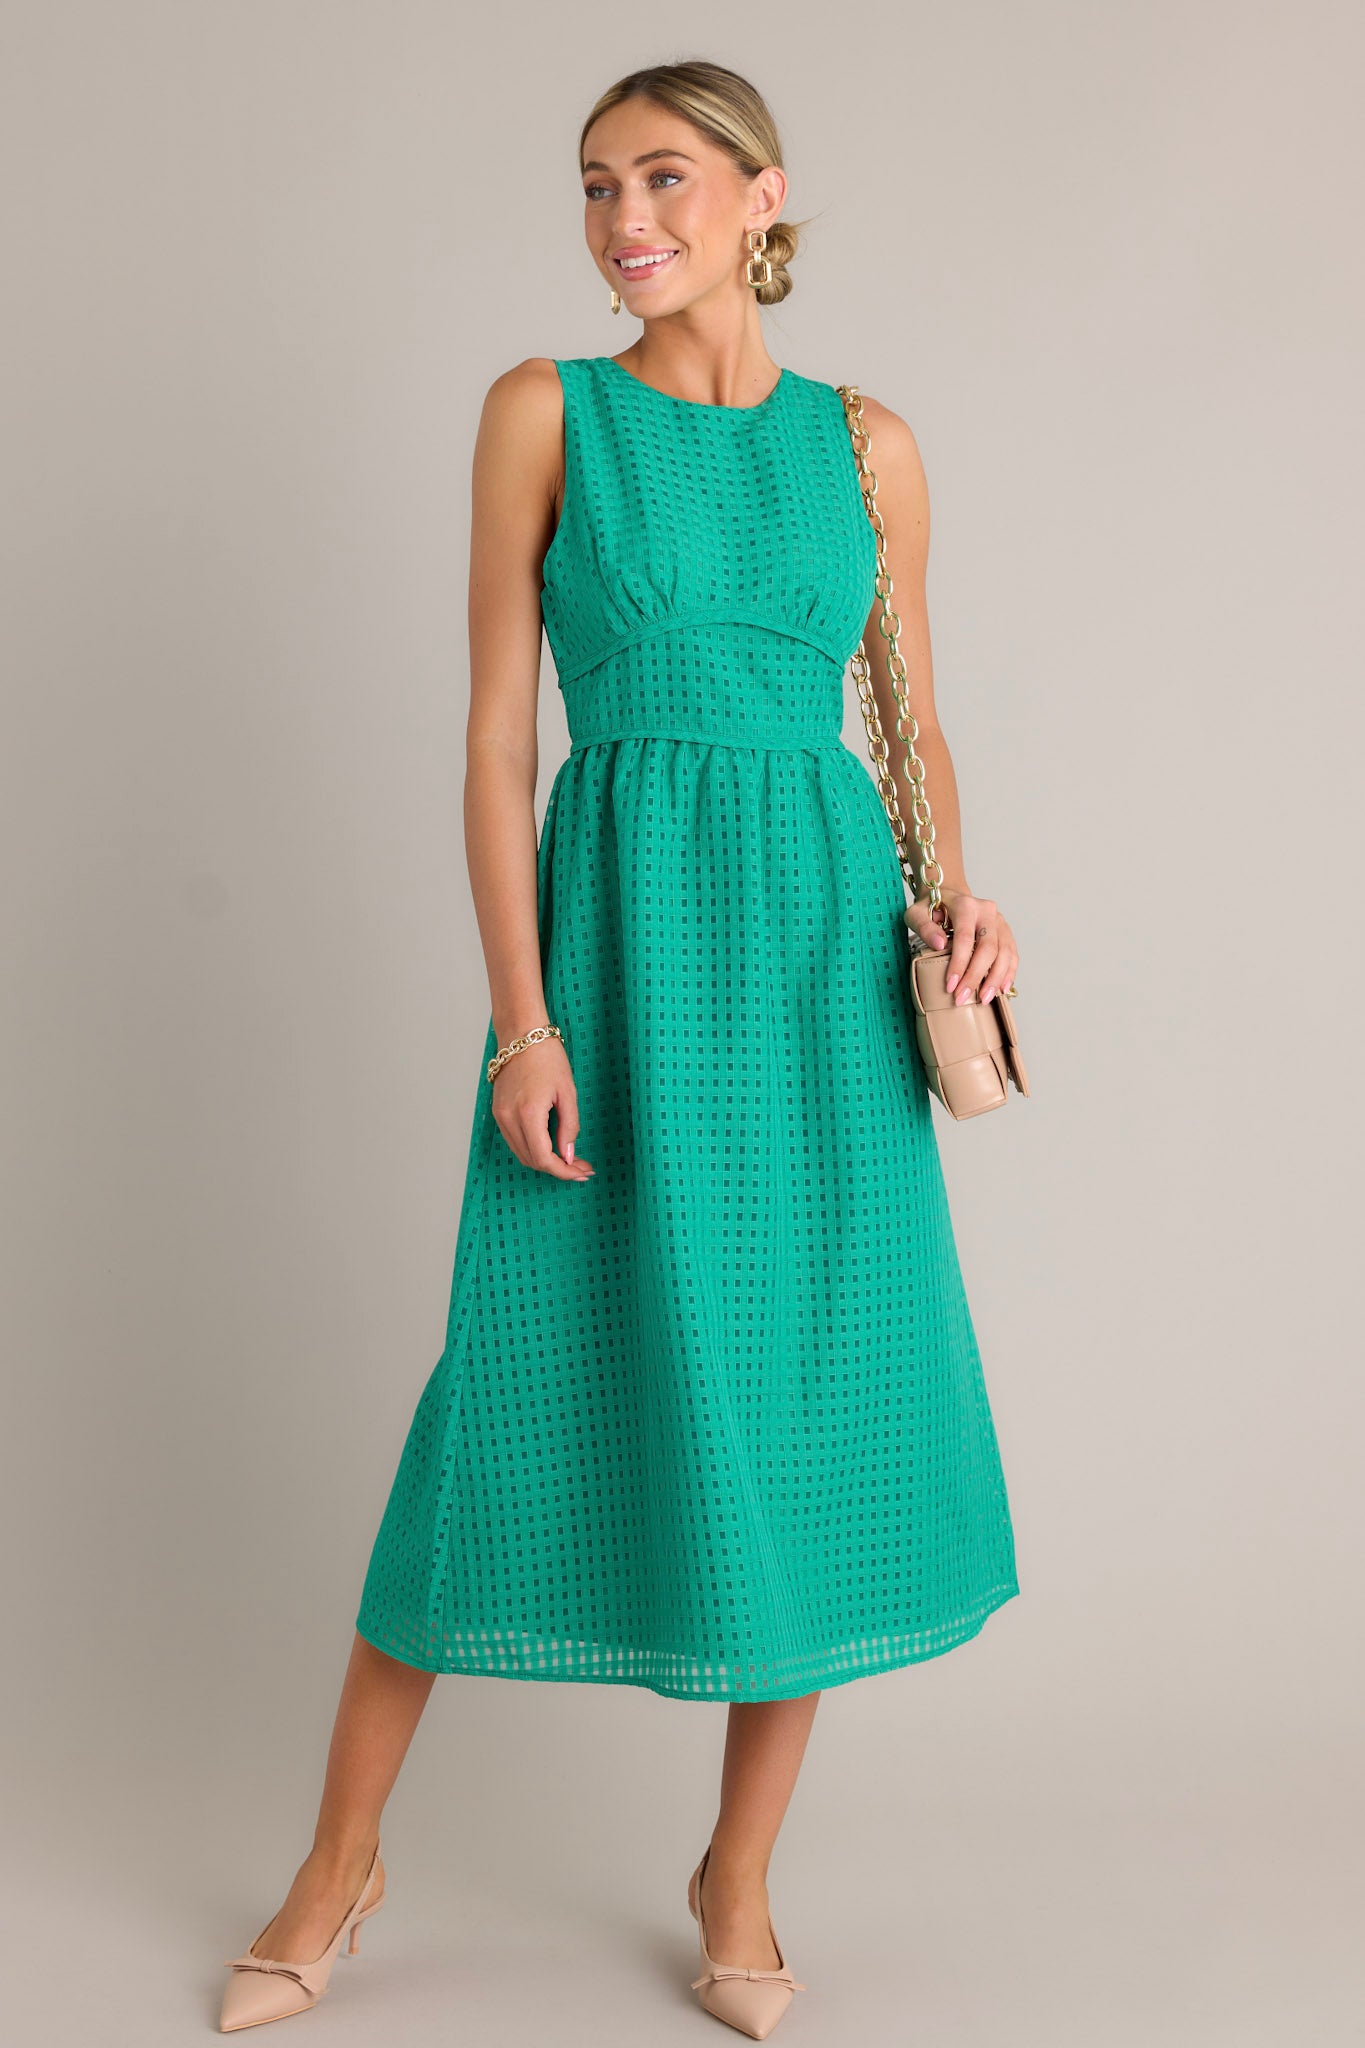 Front angled view of a green midi dress featuring a high neckline, a discrete back zipper, a thick waistband, a grid-like pattern, and a sleeveless design